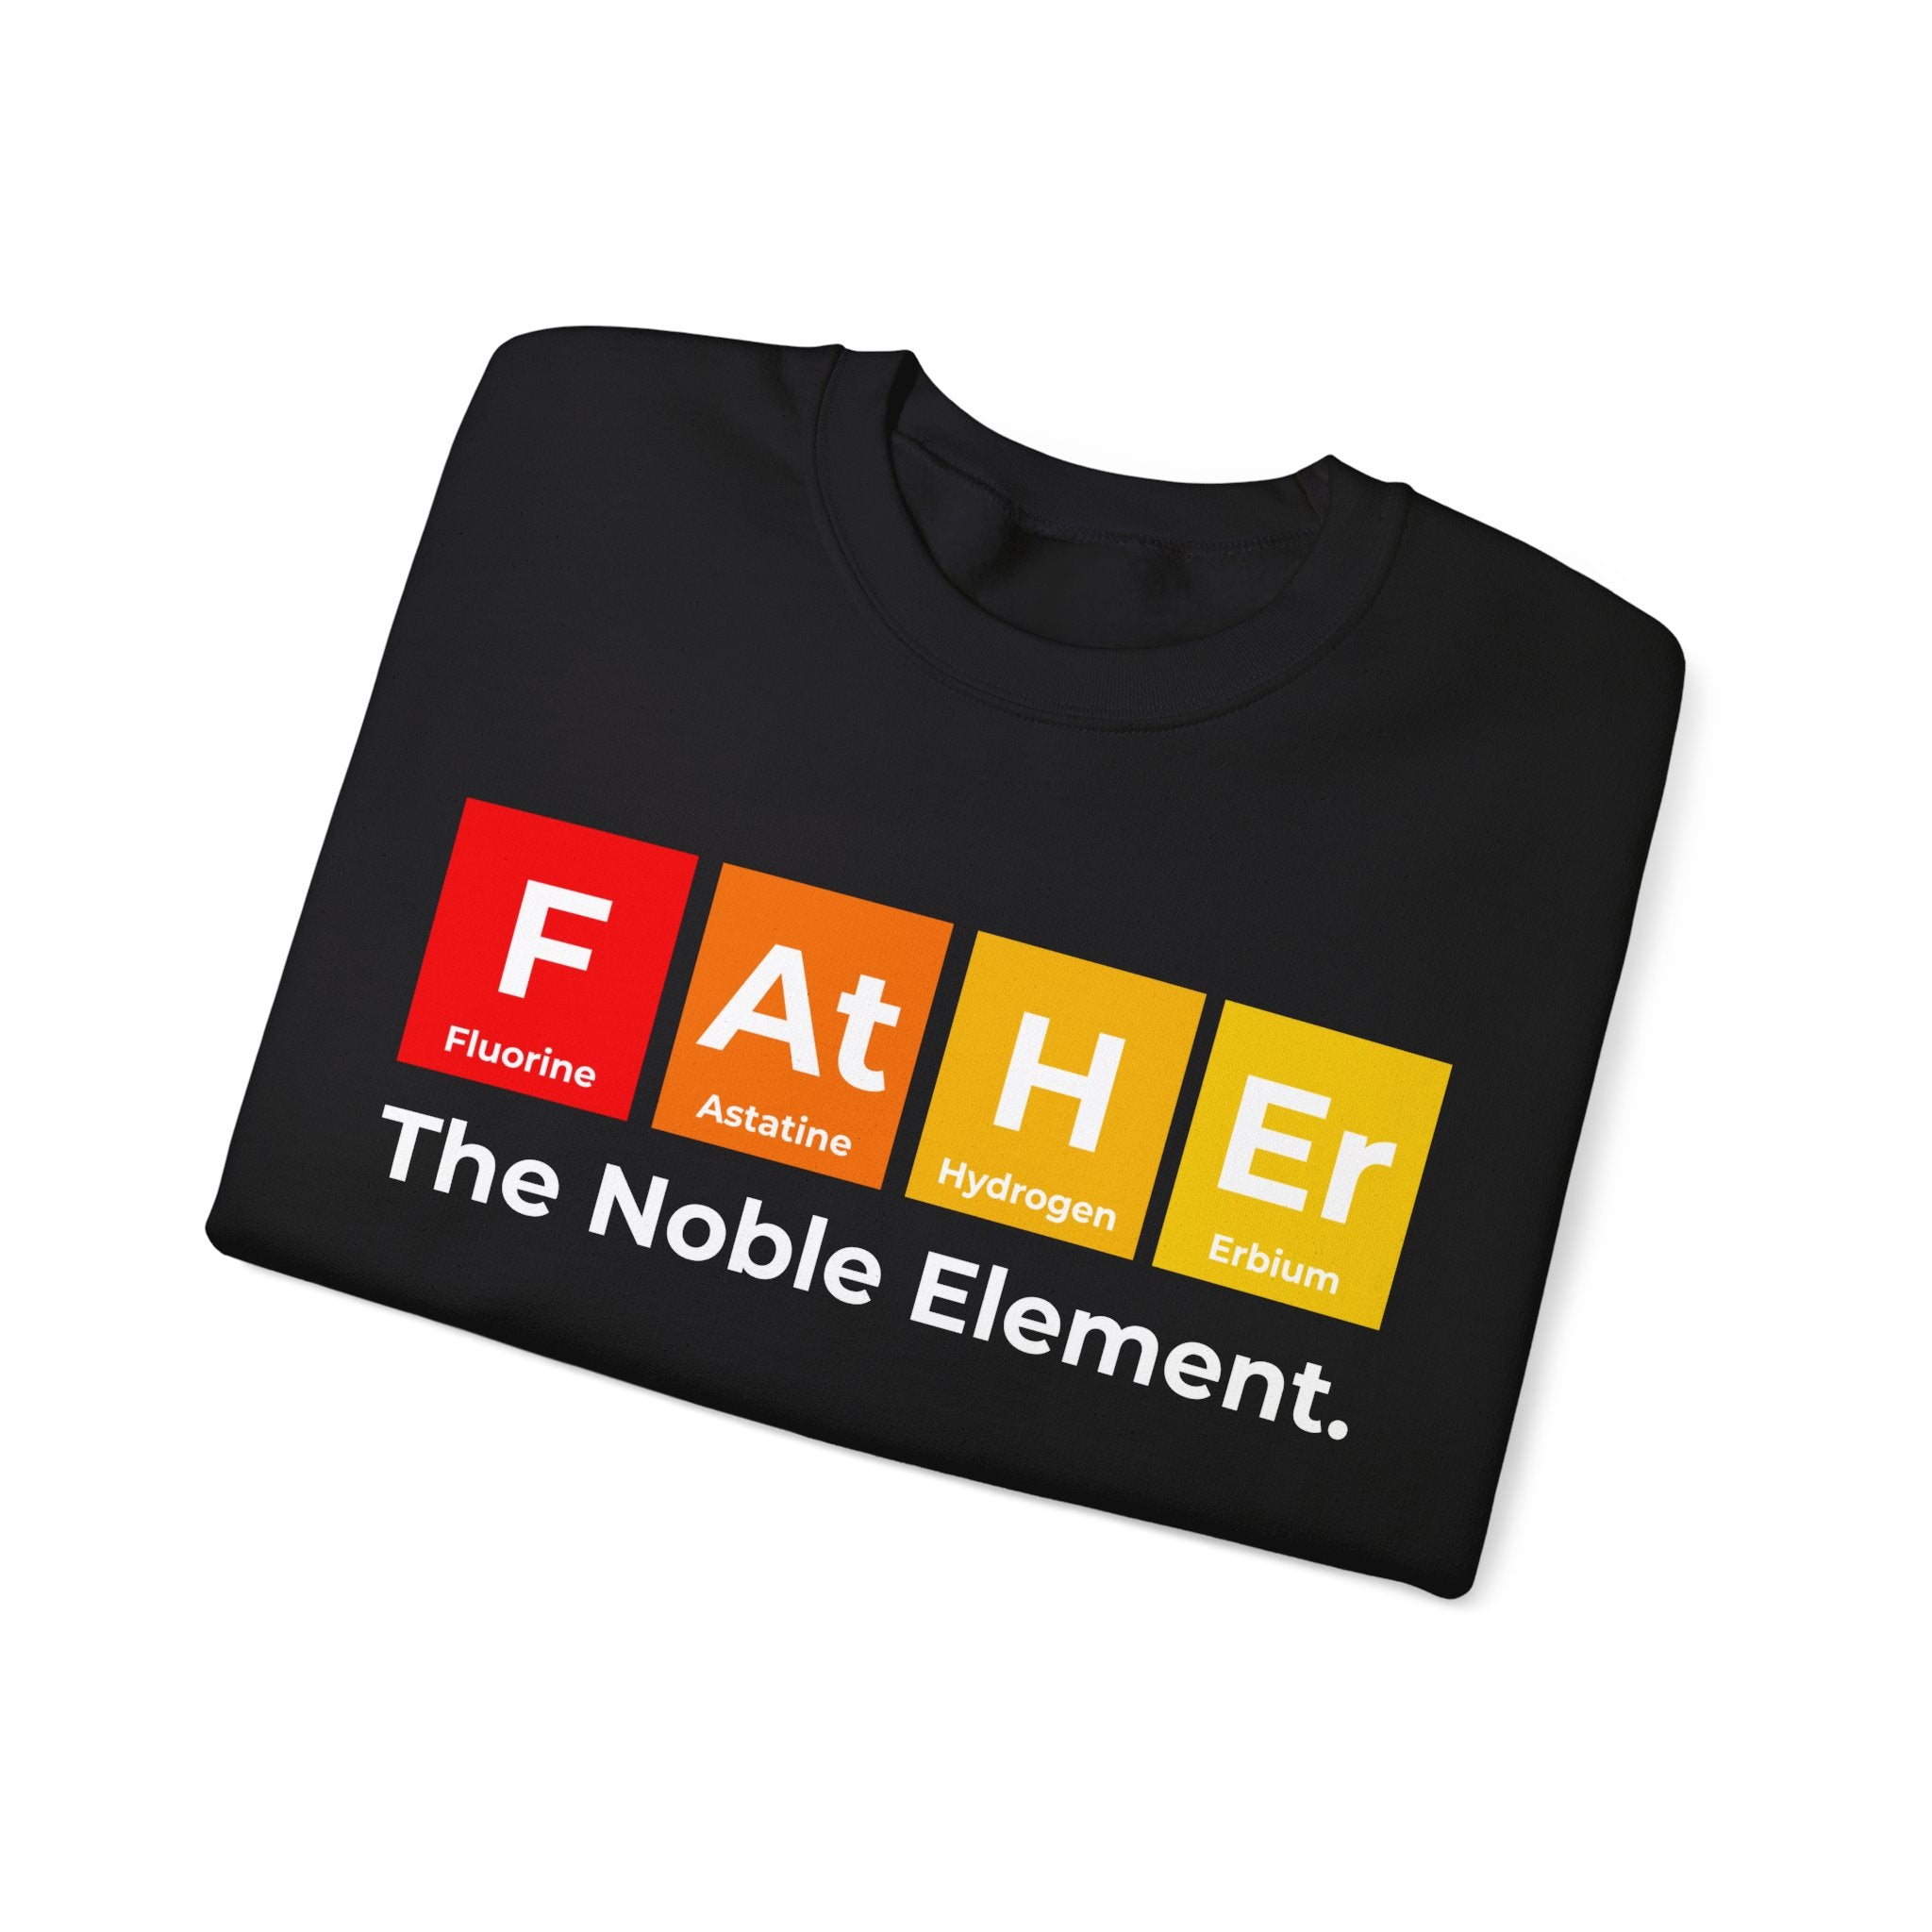 Cozy and warm, this Father Graphic -  Sweatshirt features a clever text design "FAtHEr The Noble Element" using elements fluorine, astatine, hydrogen, and erbium from the periodic table to spell "Father." Perfect for winter days.